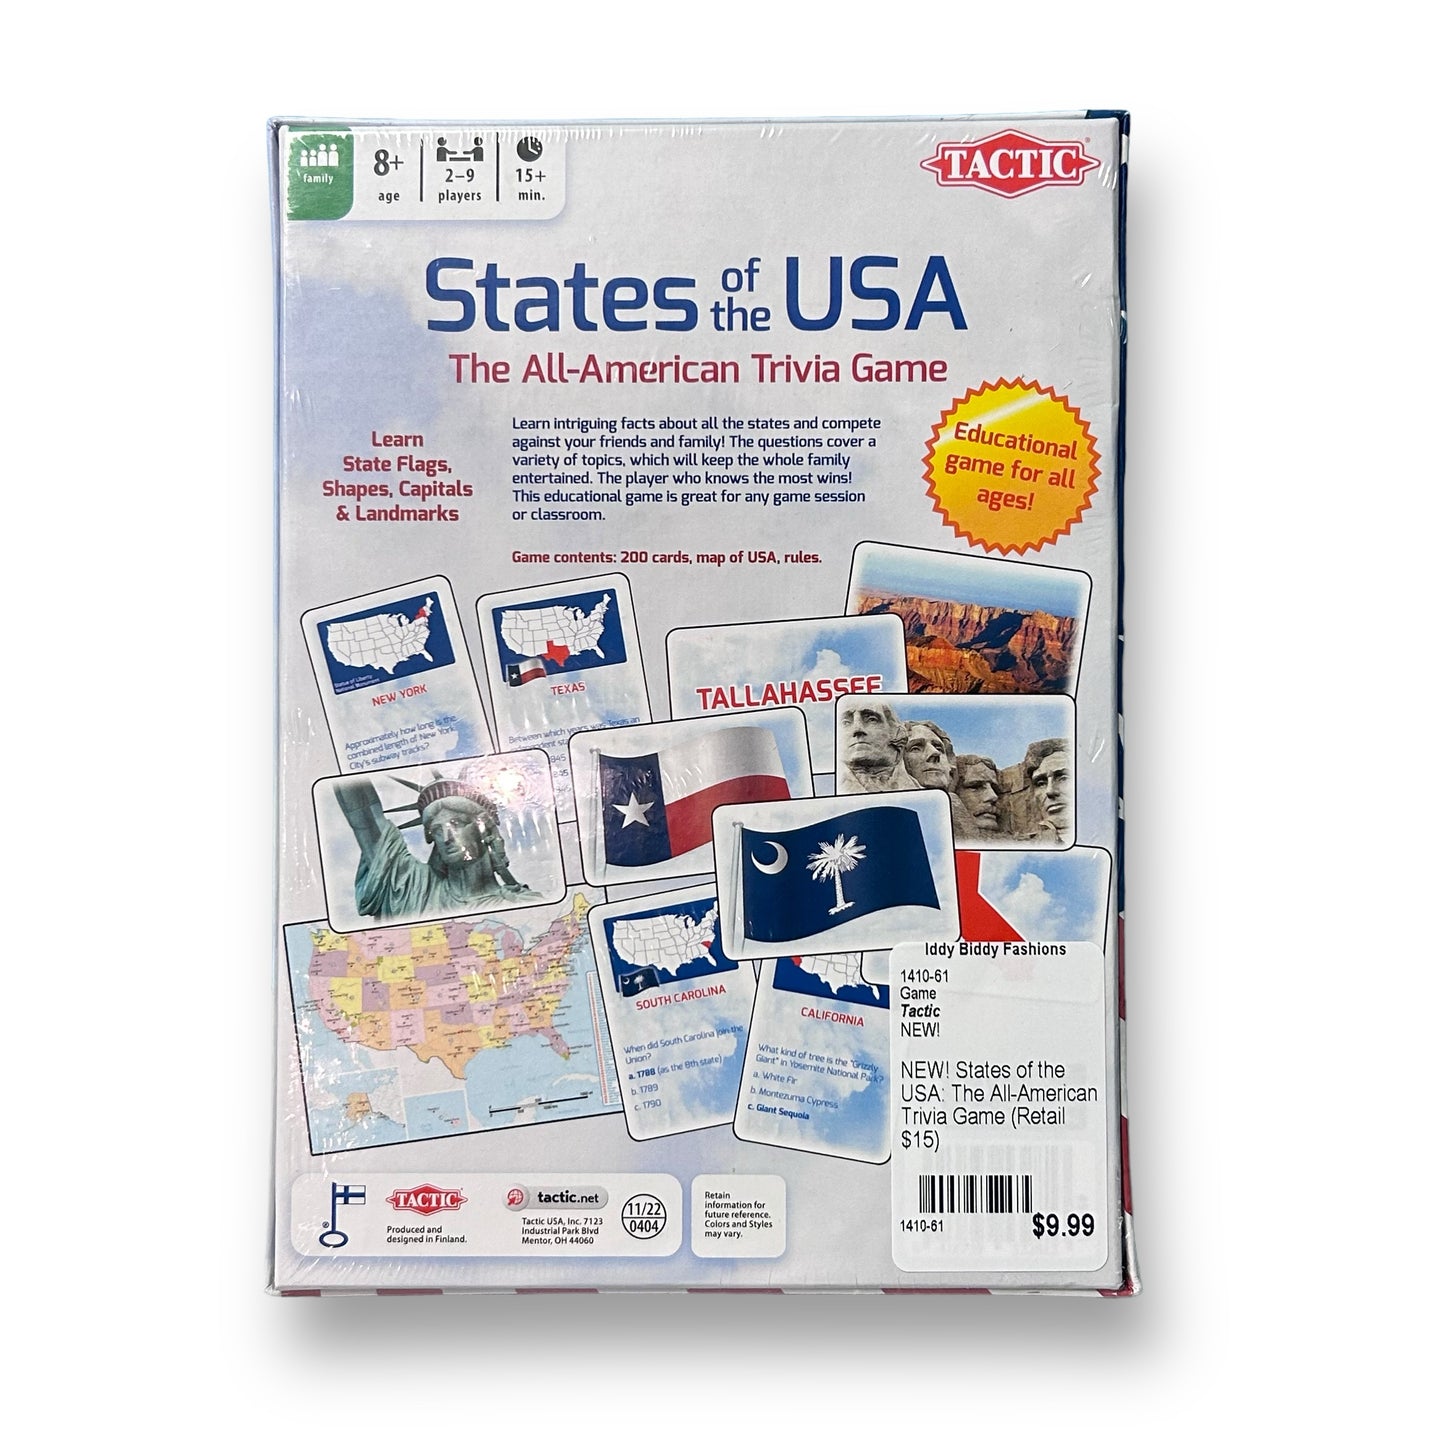 NEW! States of the USA: The All-American Trivia Game